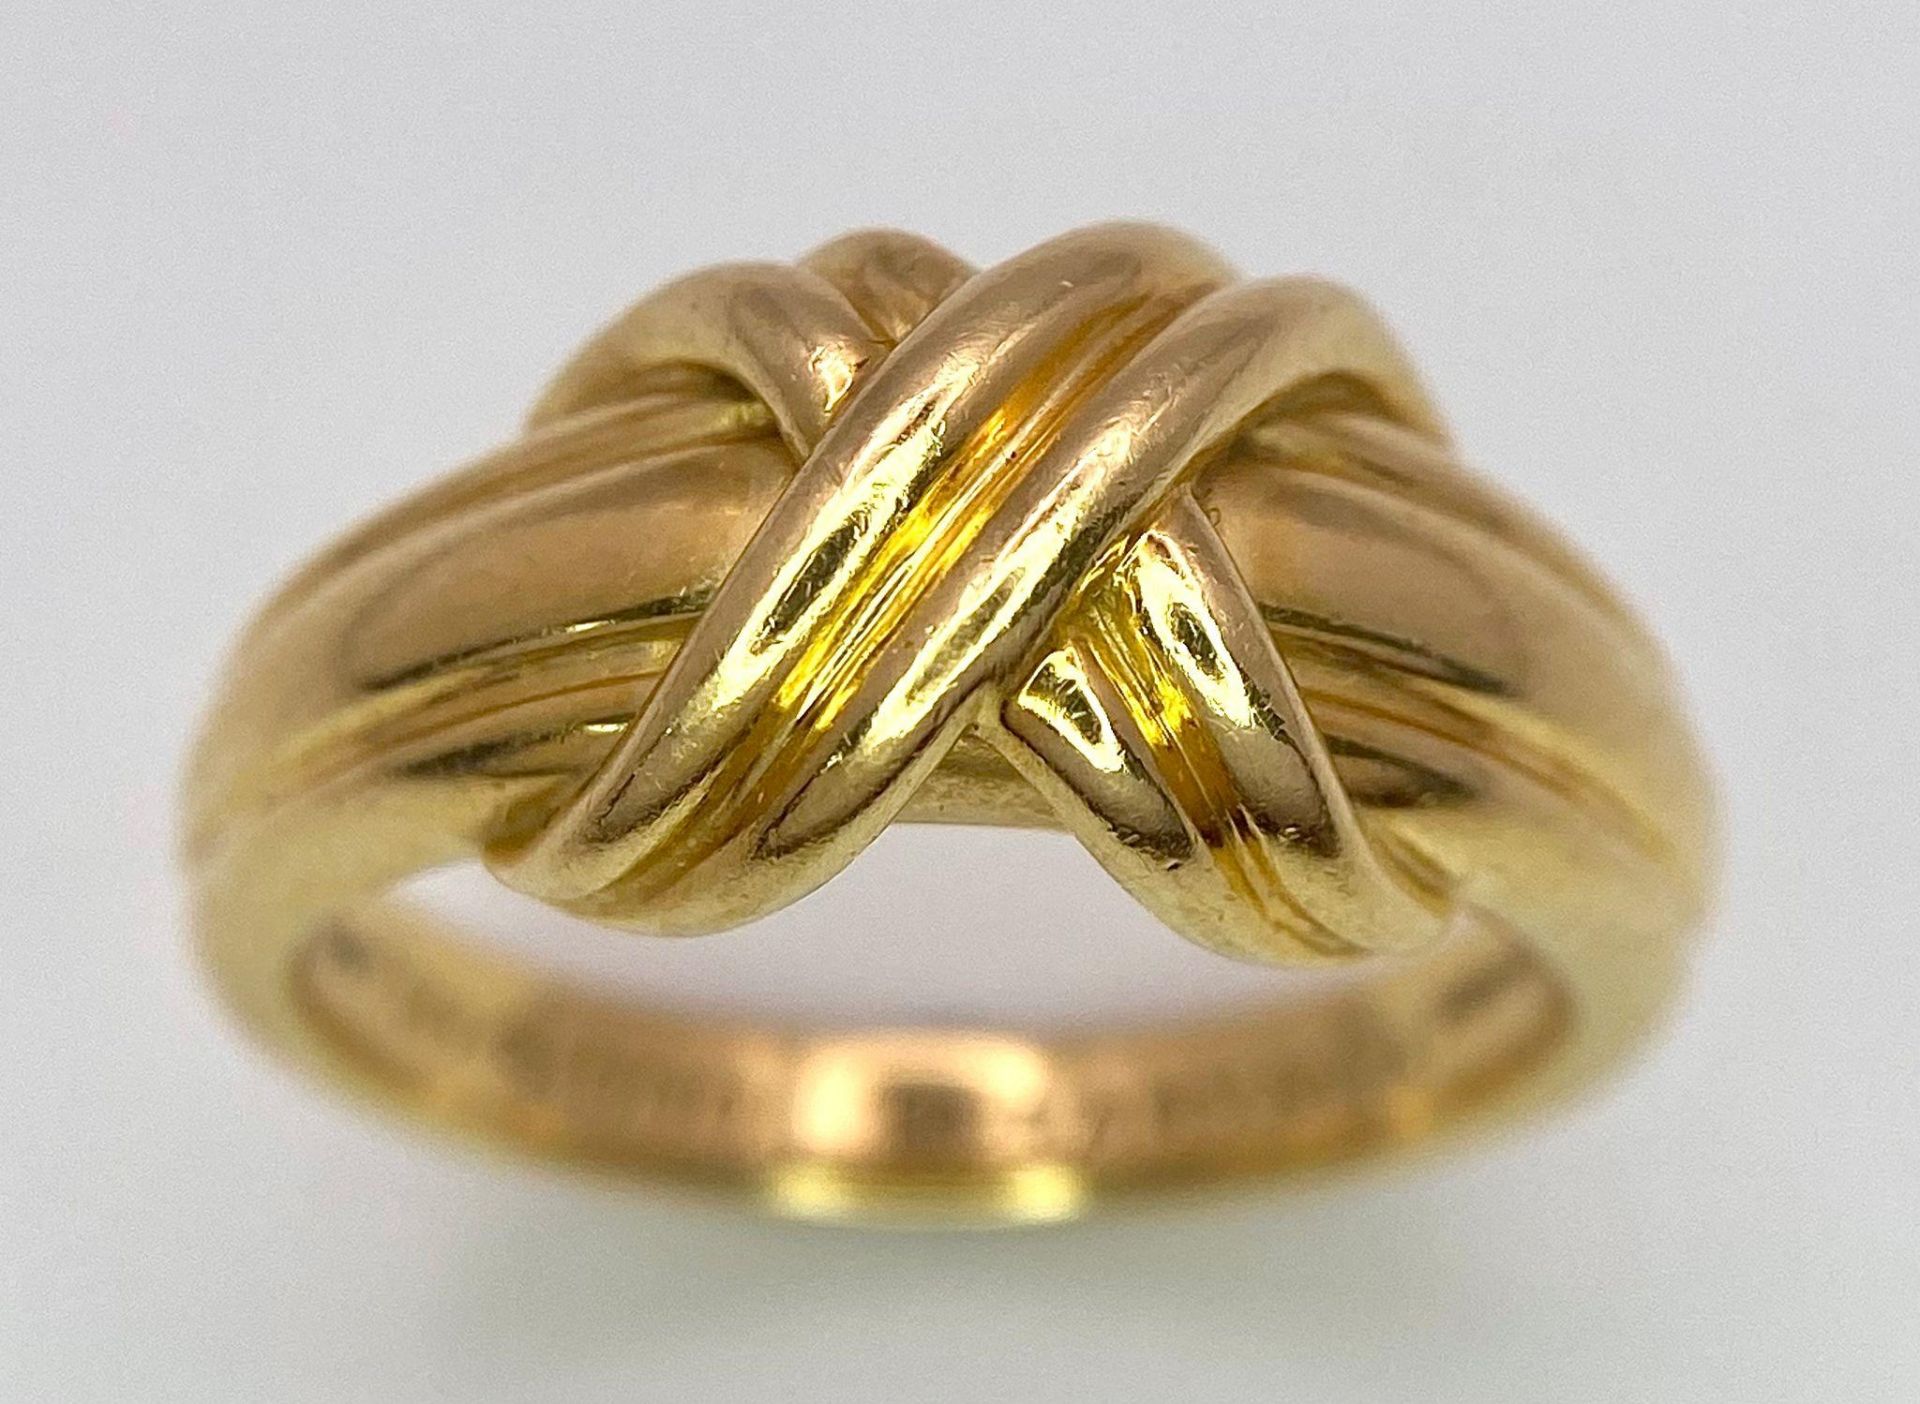 A Beautiful Tiffany and Co. 18K Gold Love Ring. Tiffany and co. markings. Size N. 7.2g weight. - Bild 2 aus 10